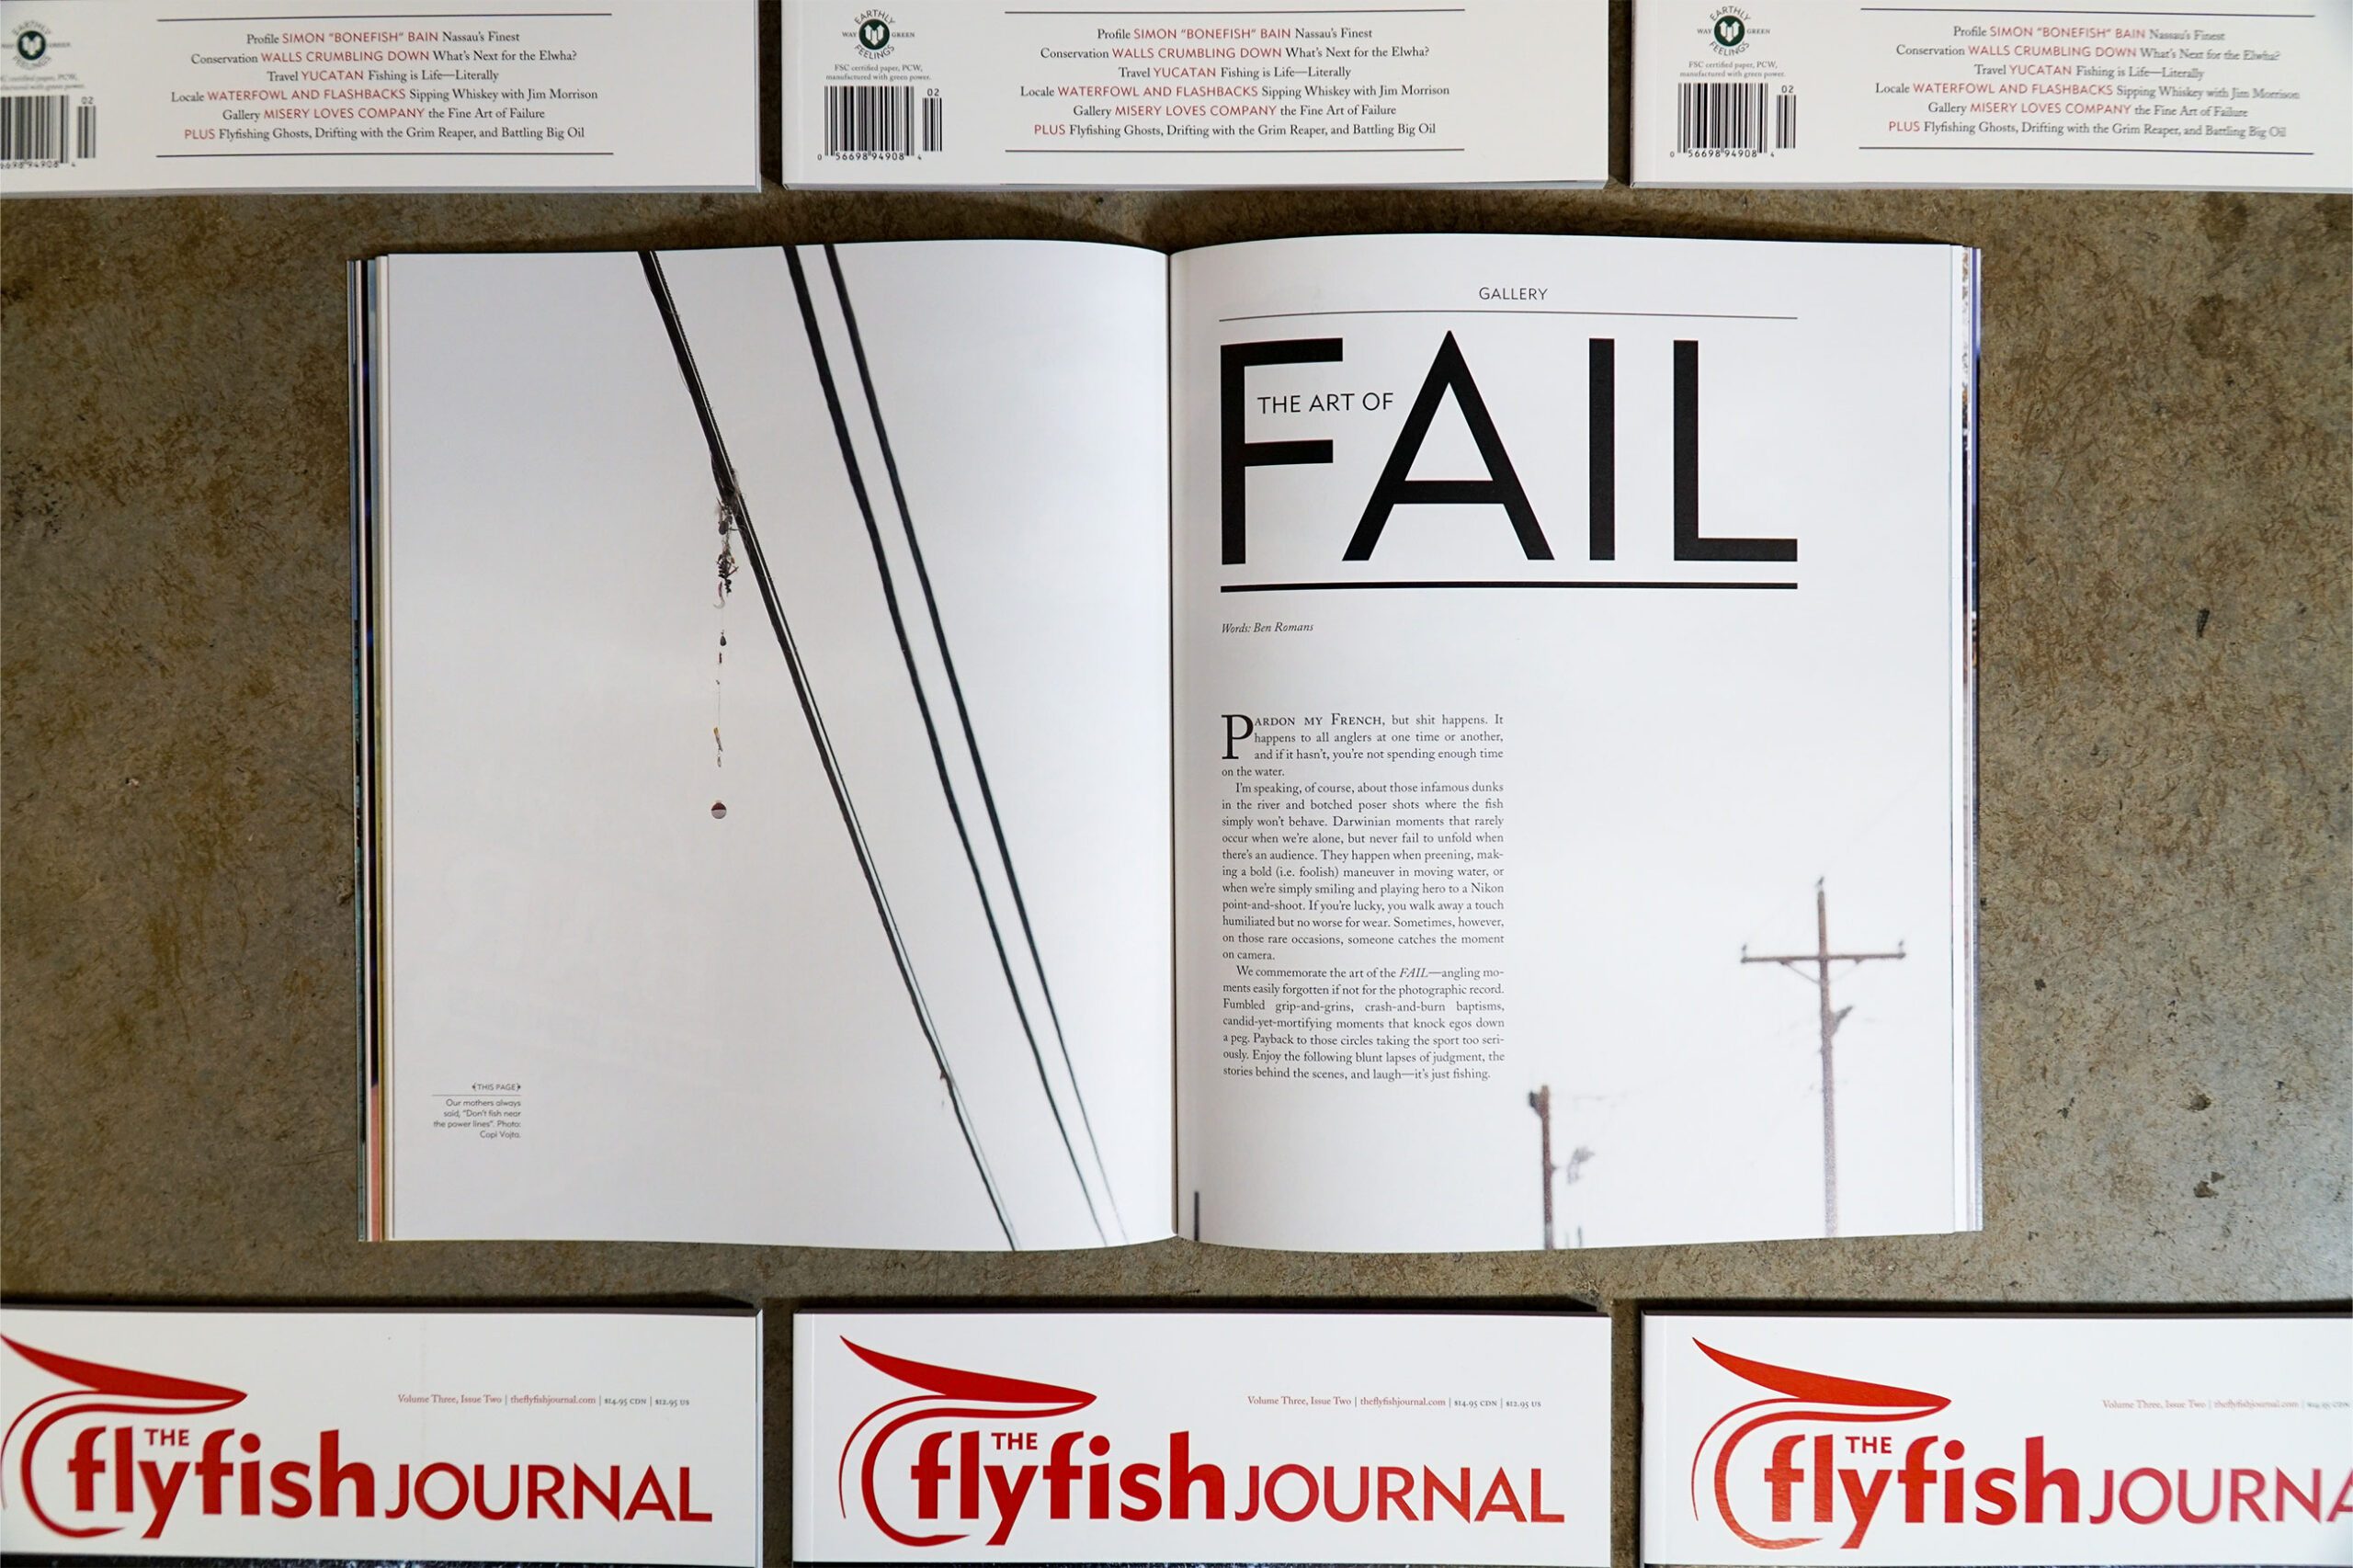 The Flyfish Journal Volume 3 Issue 2 Feature The Art of Fail